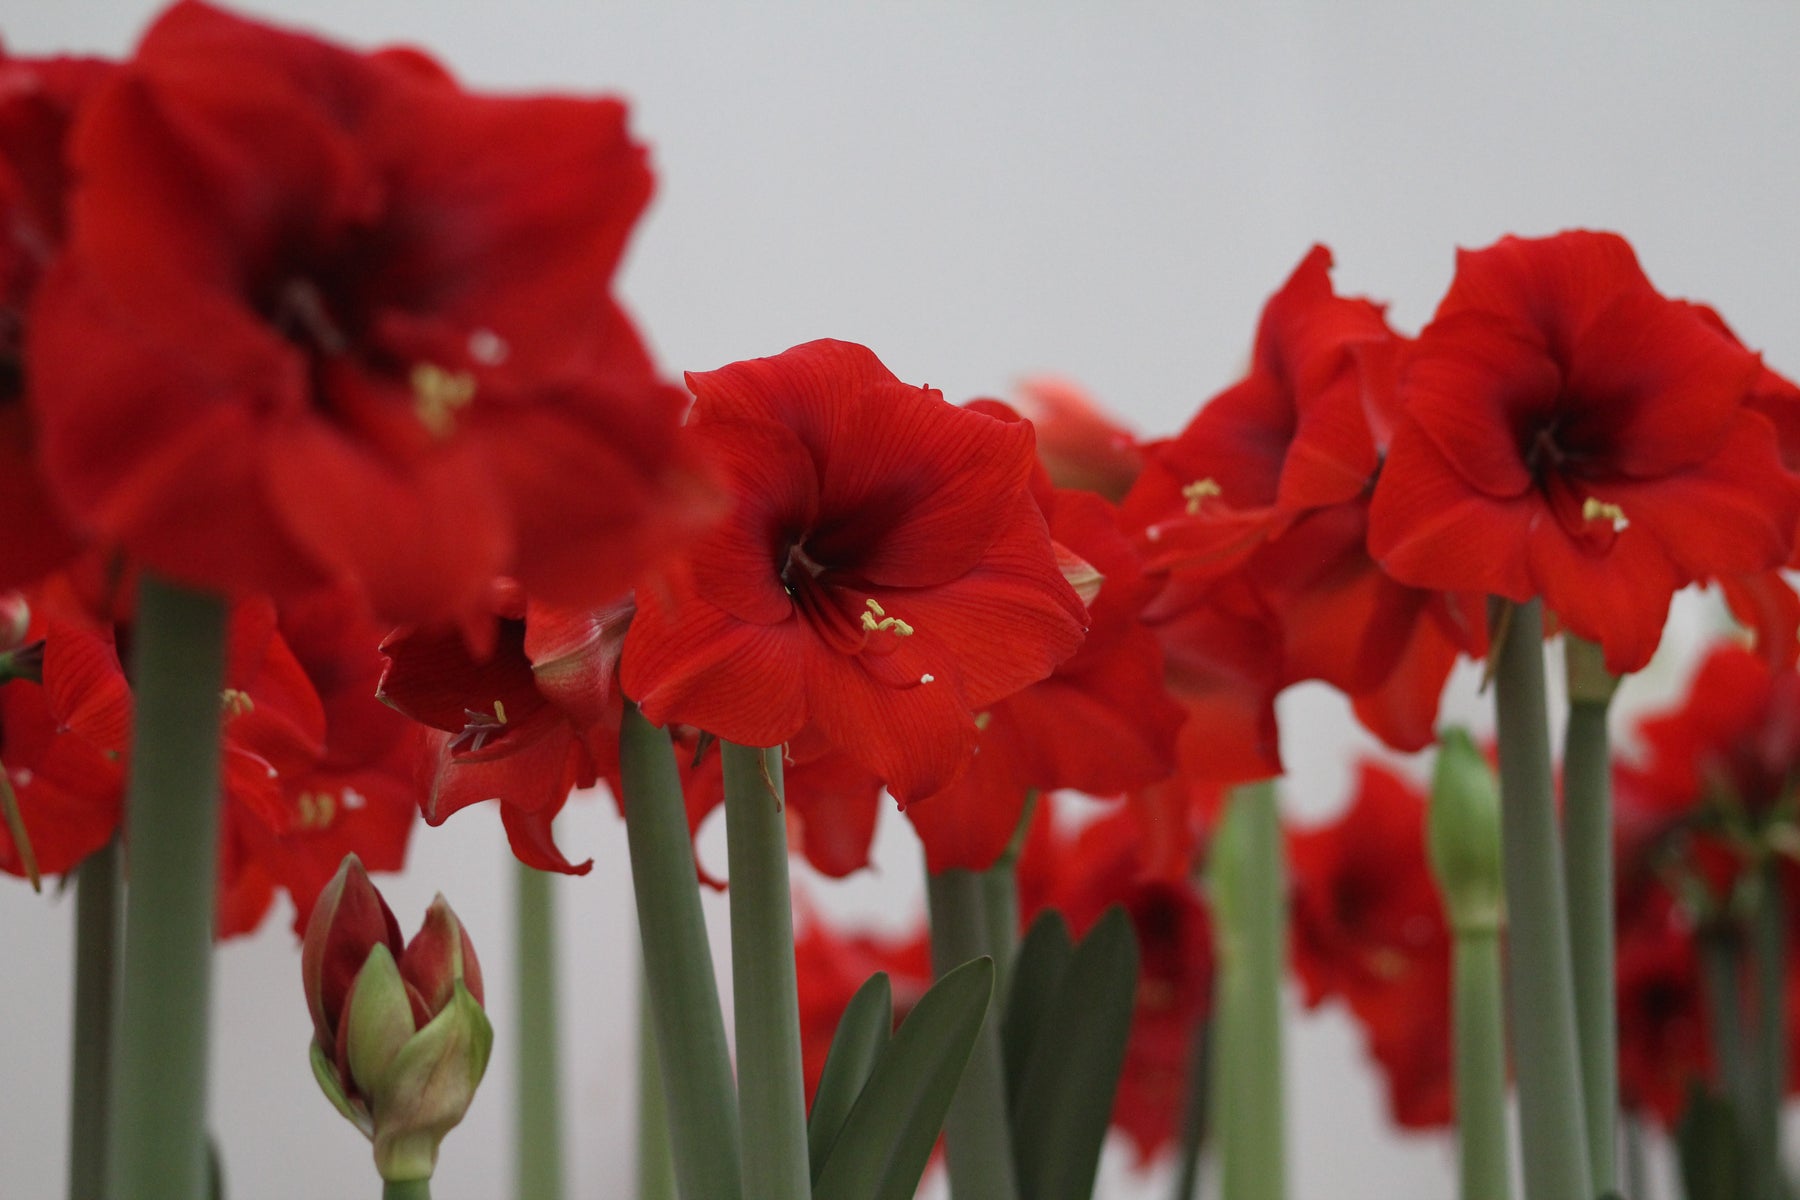 Cultivating Beautiful Amaryllis Flowers with Ease